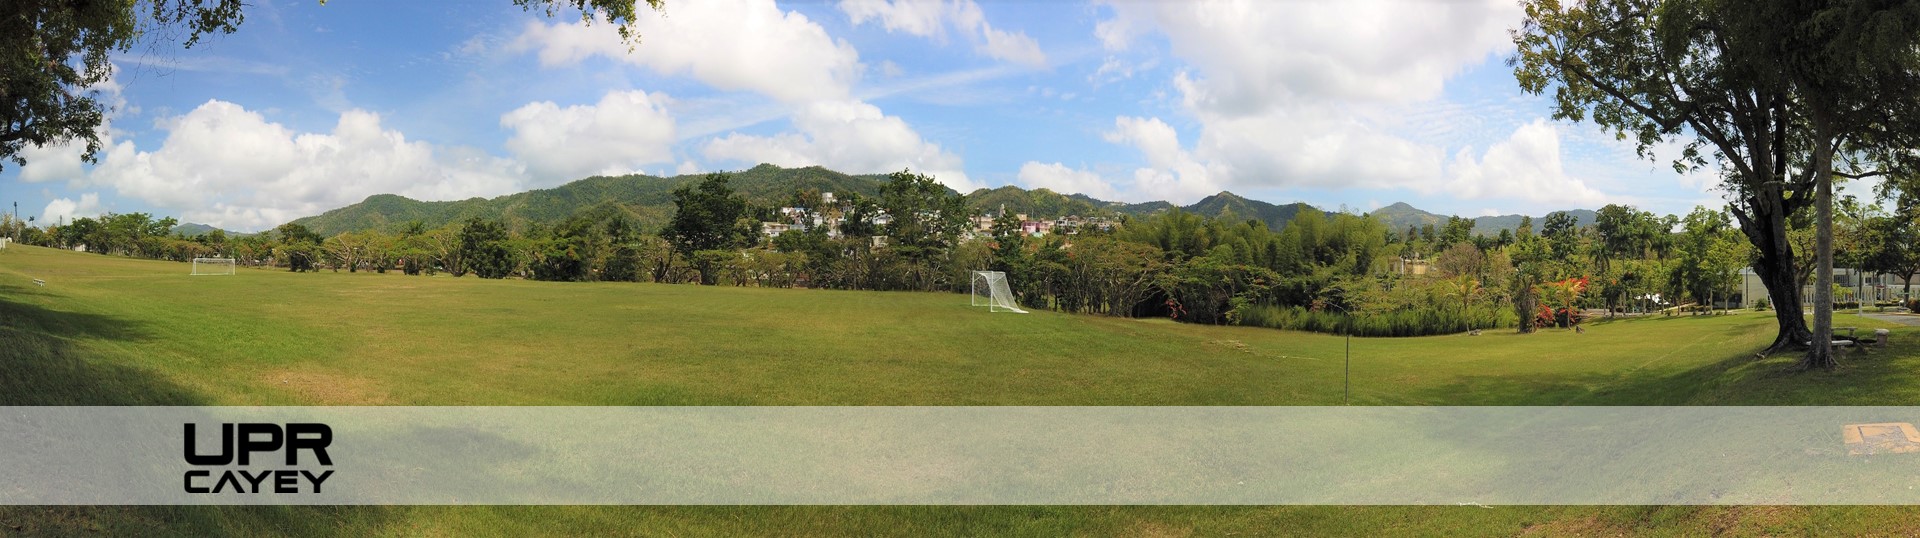 Imagen panoramica UPR Cayey 4